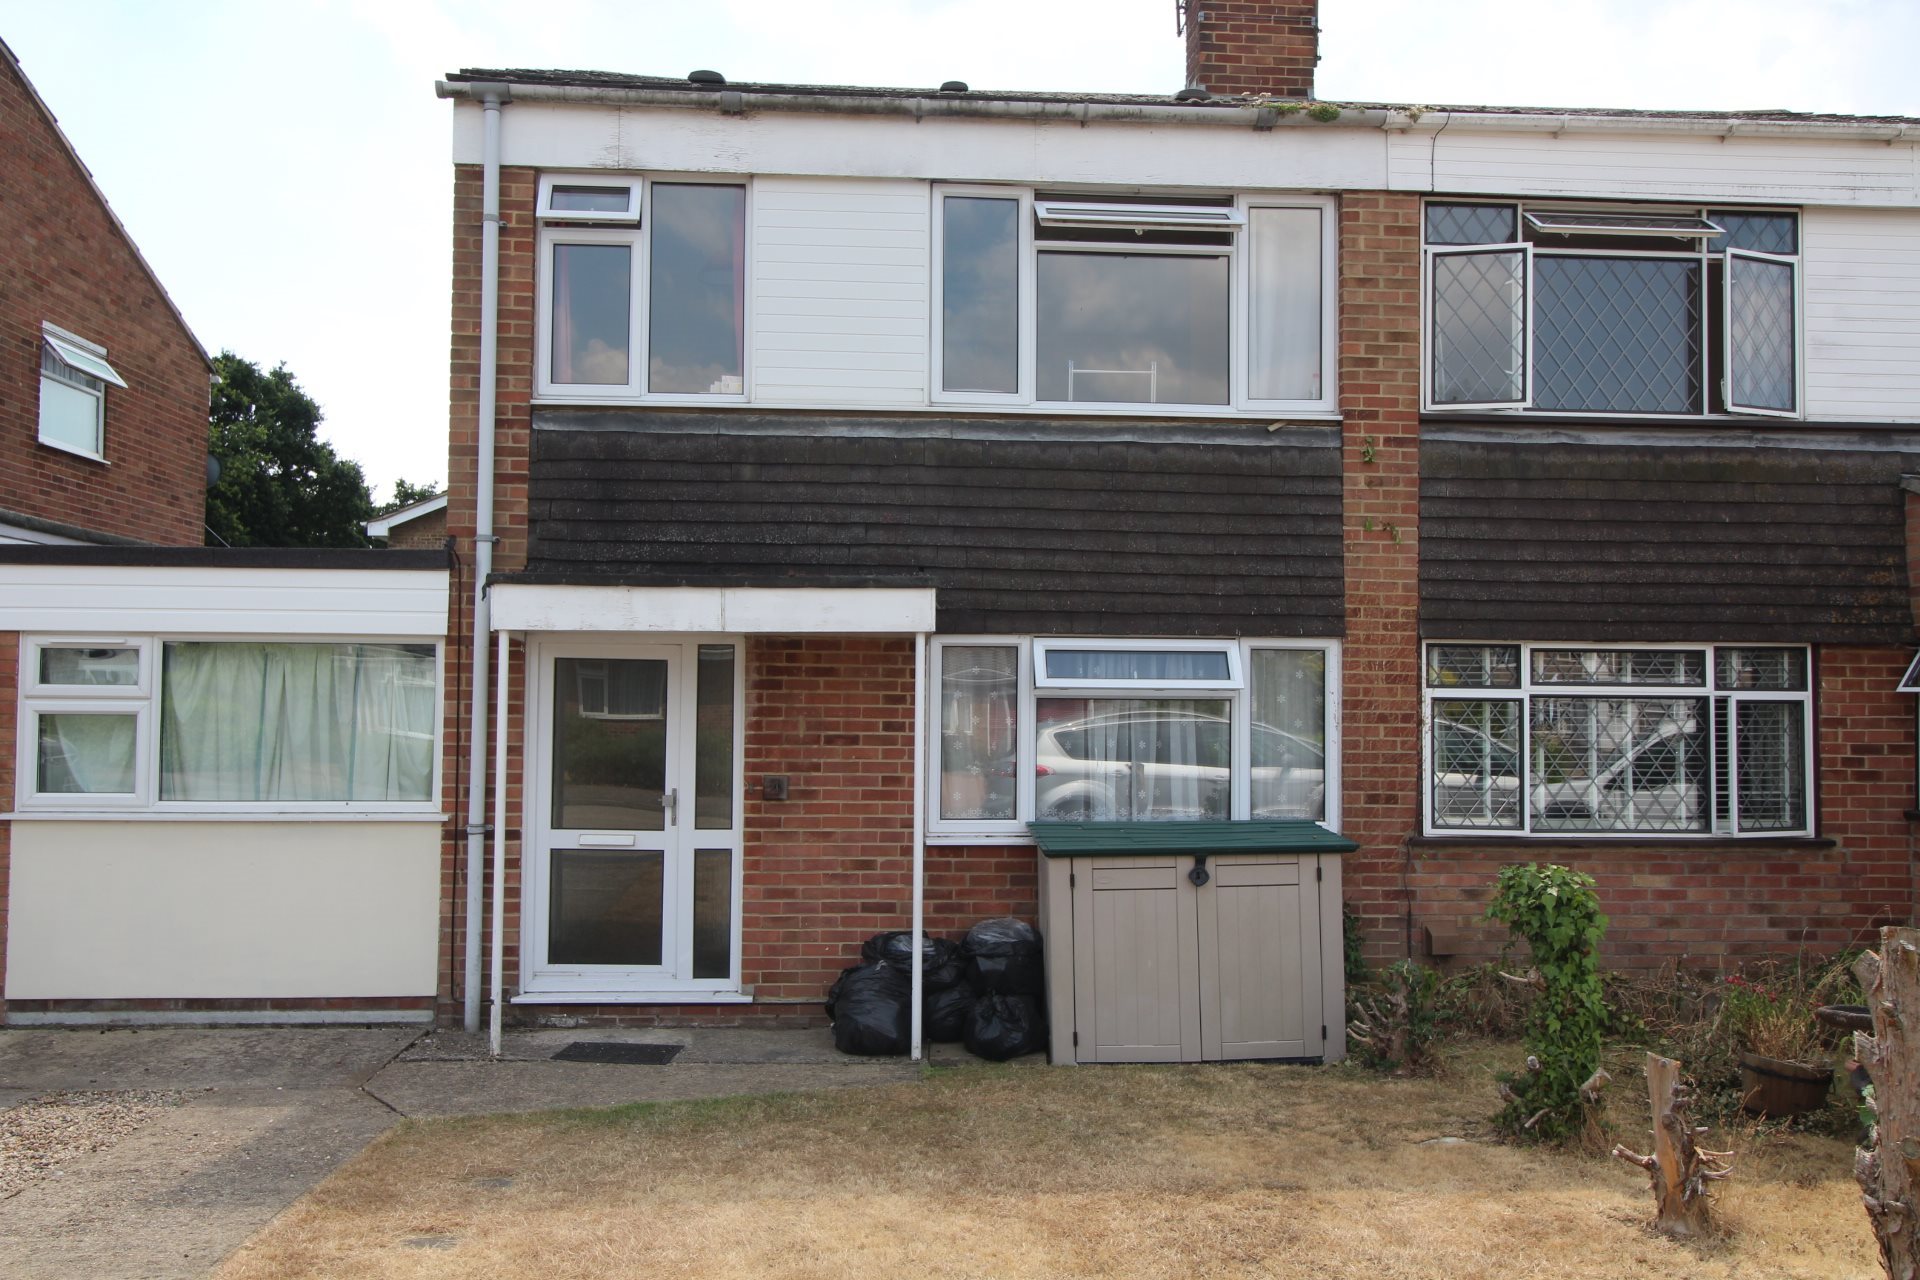 1 bed house / flat share to rent in Petworth Close, Wivenhoe 0